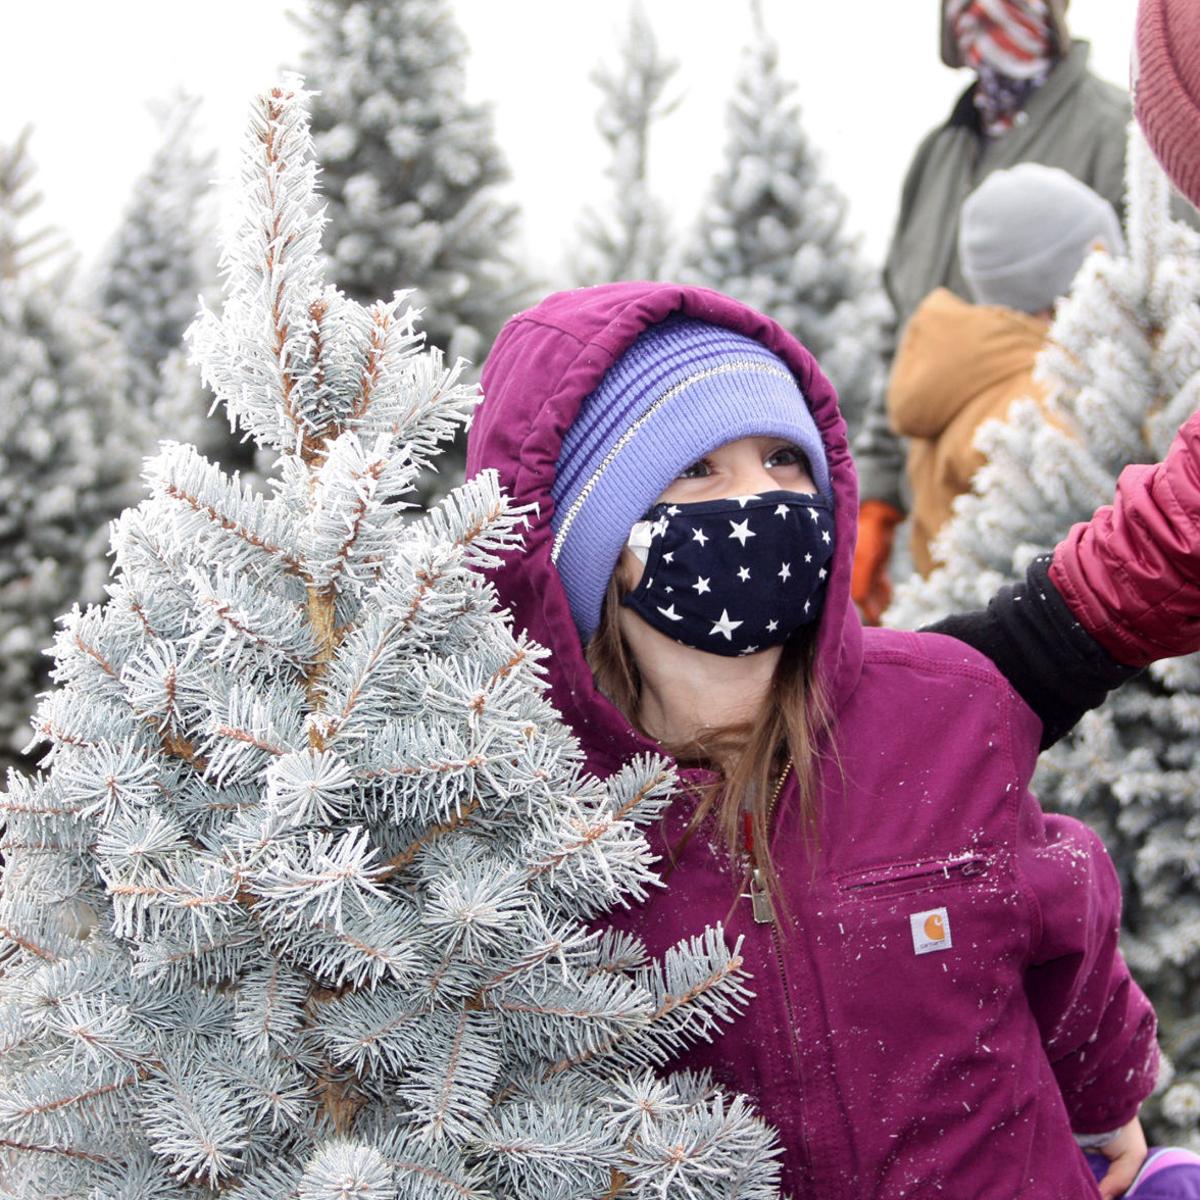 Popularity Of Customer Cut Christmas Trees Brought An Early End To Wapato Farm's Sale Season